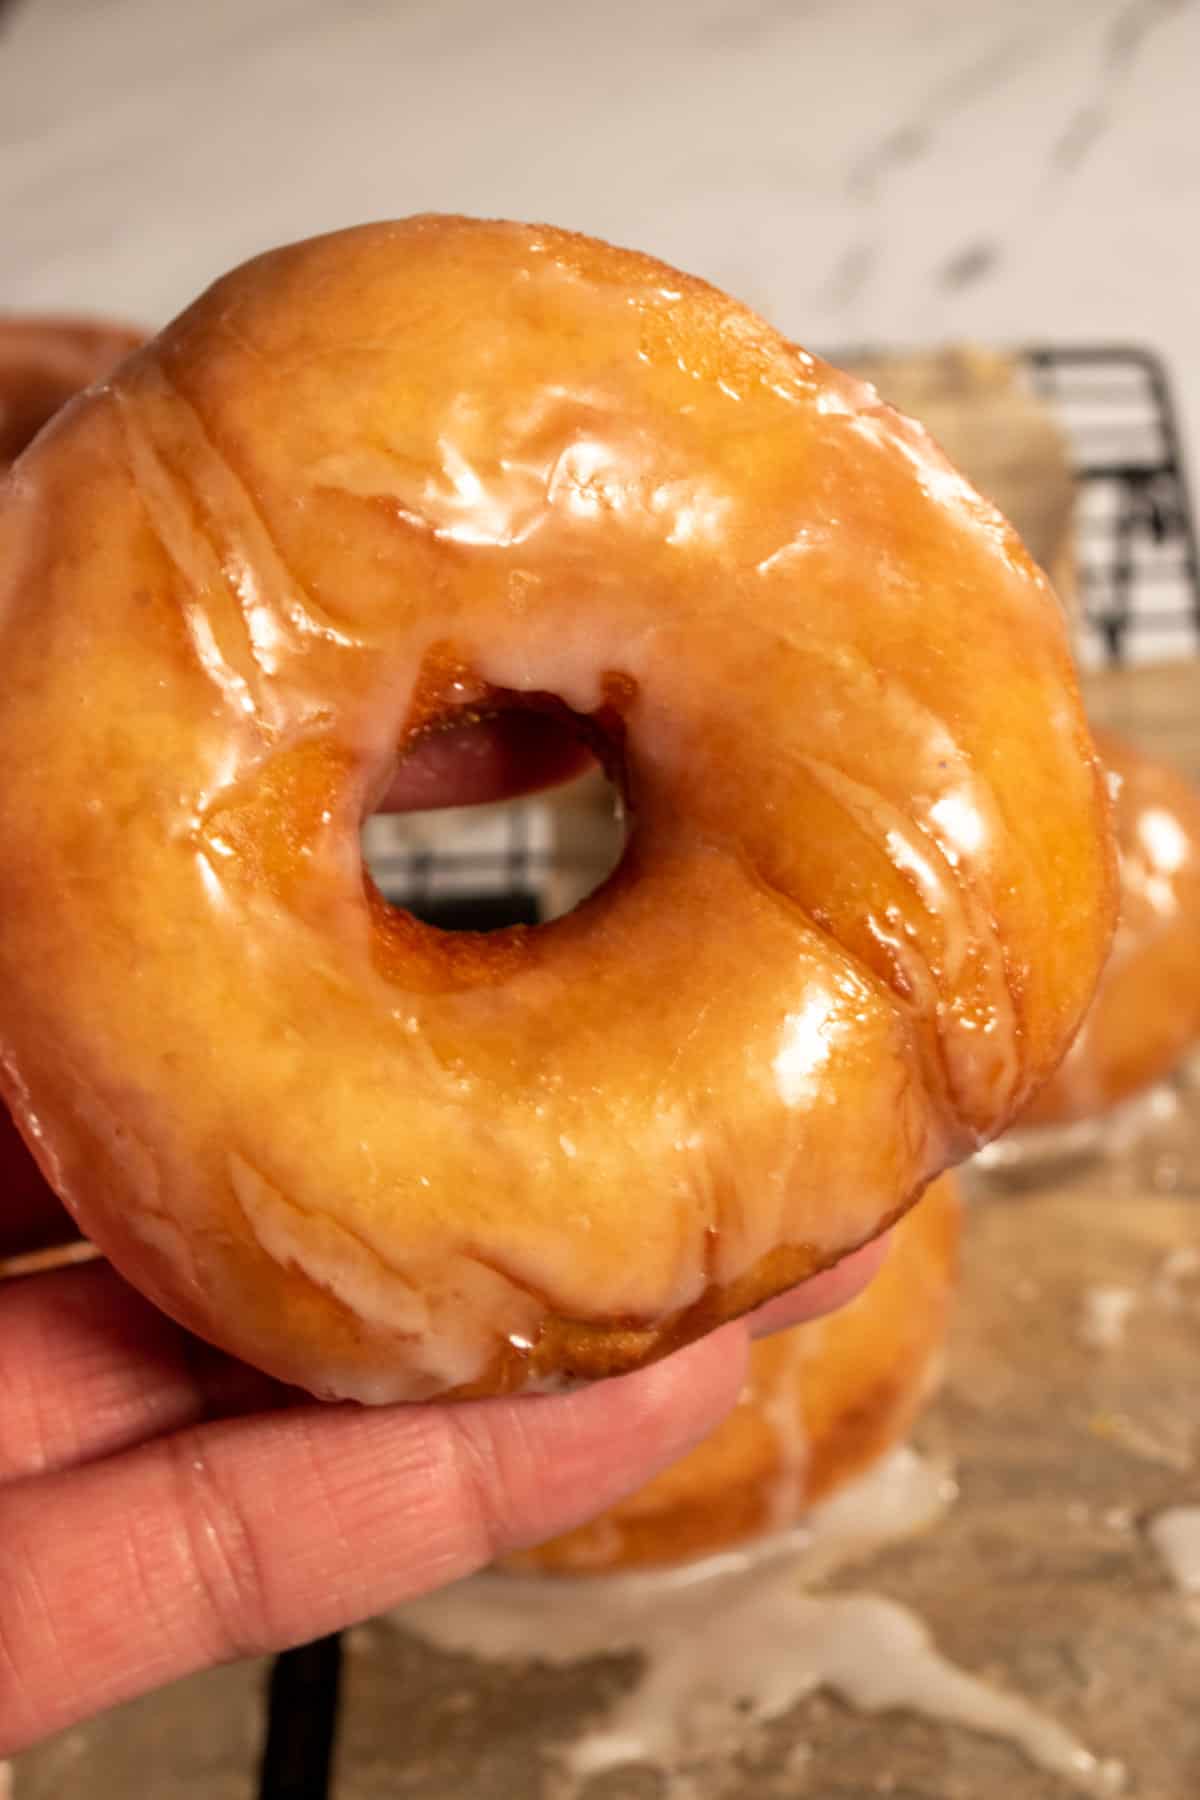 A single round donut being held in a hand. It is dripping with glaze.